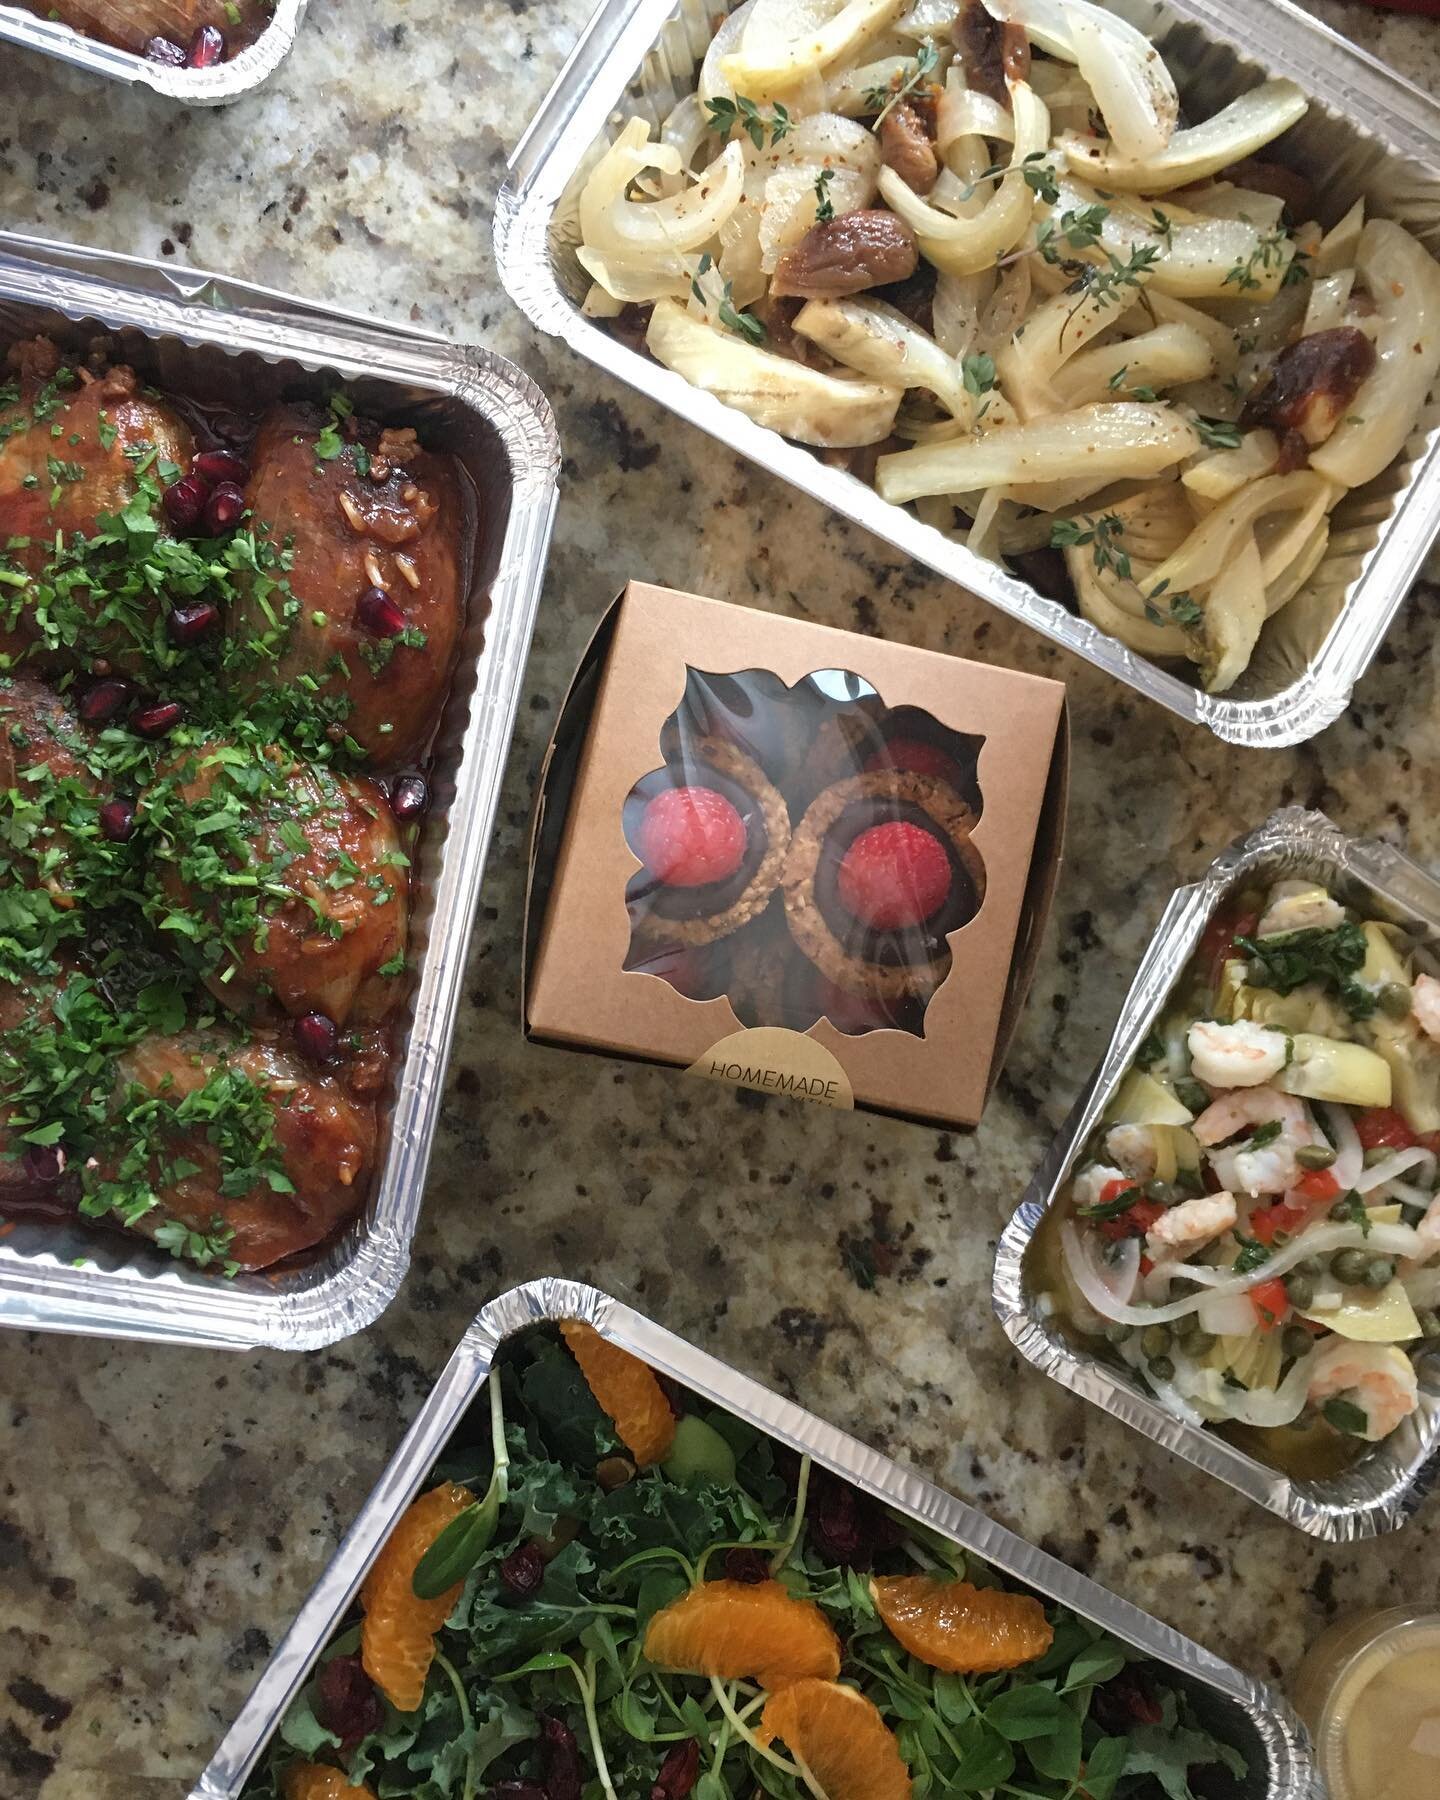 Happy Valentine's Day from Phia's! Check out the Valentine's Date Night meals we delivered this weekend. 

Would you be interested in more date nights?  Phia's is planning picnic Date Nights this Spring.  Sign up to receive Phia's e-newsletter to sta